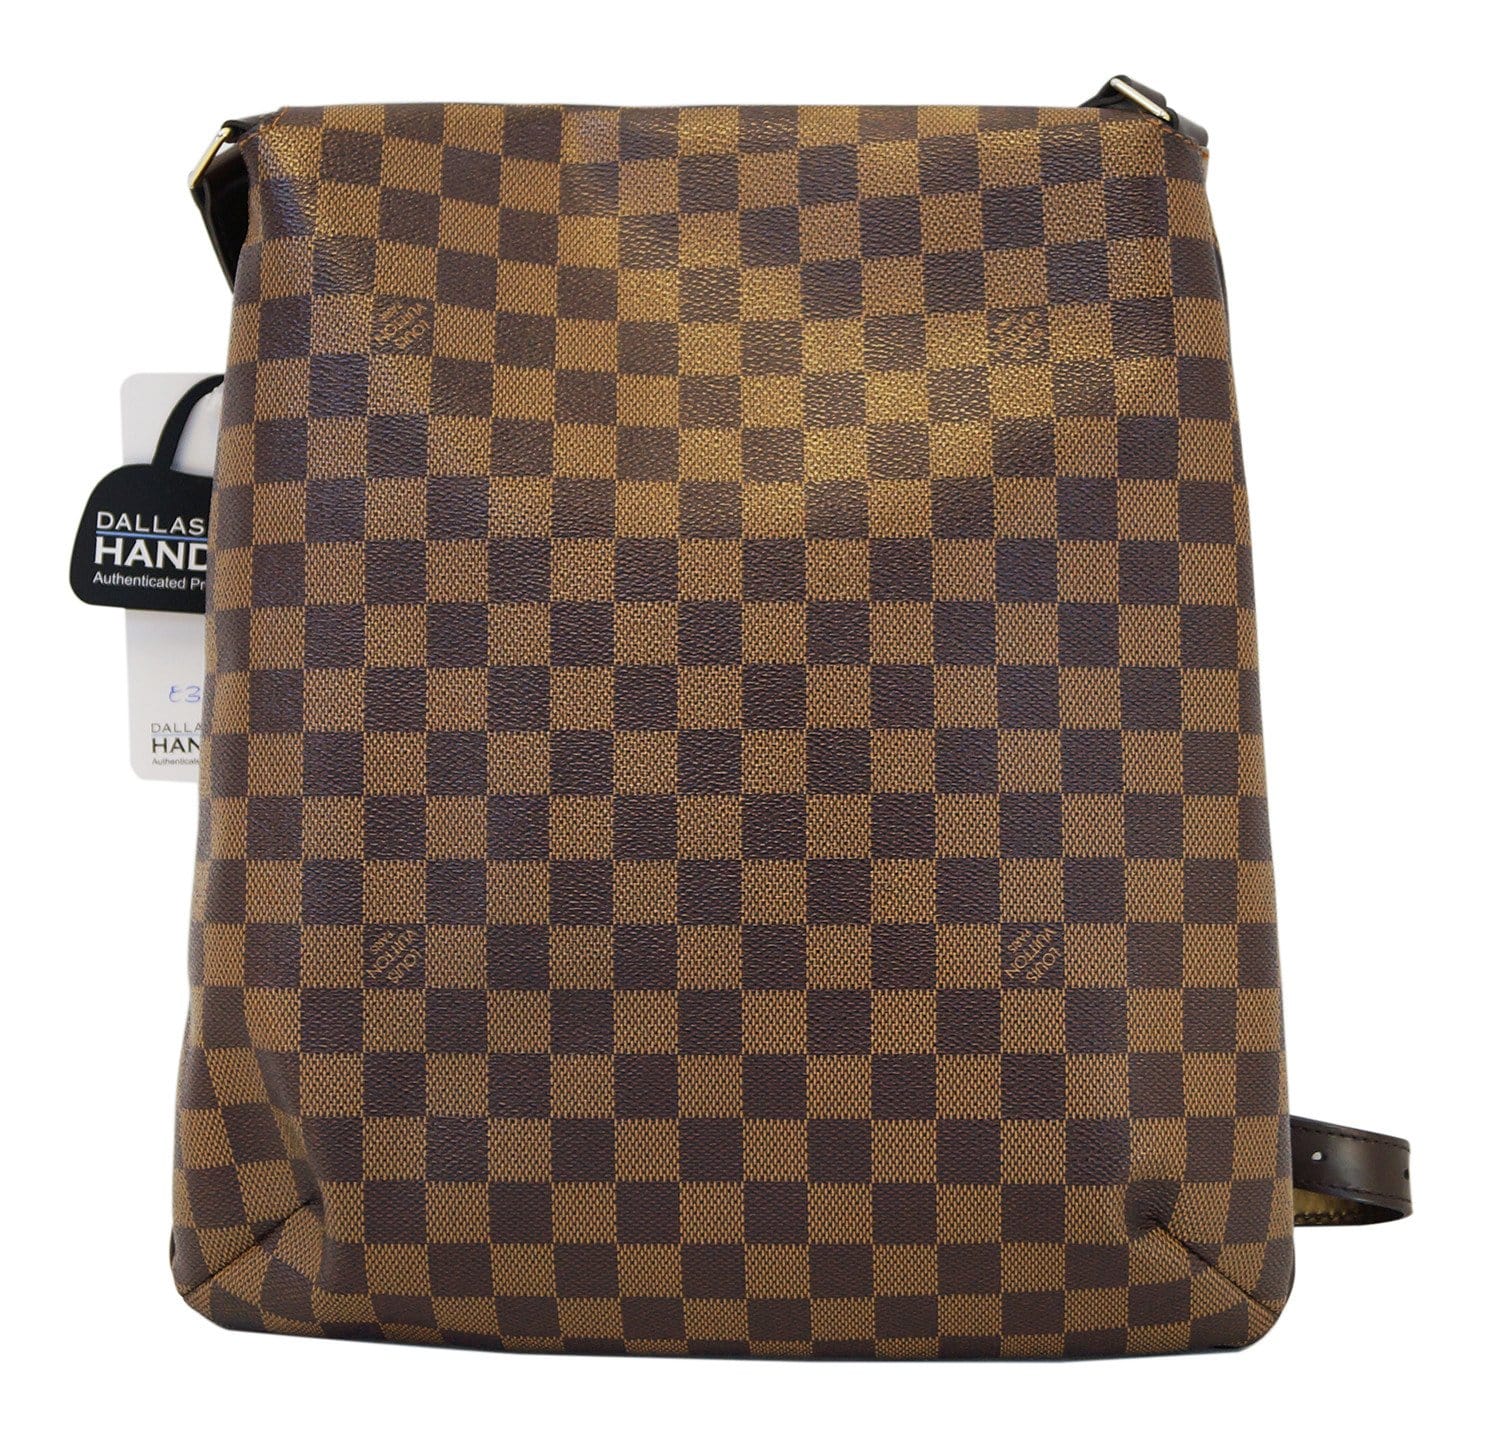 Authenticated Used Louis Vuitton Damier Luggage Brown Damier Canvas